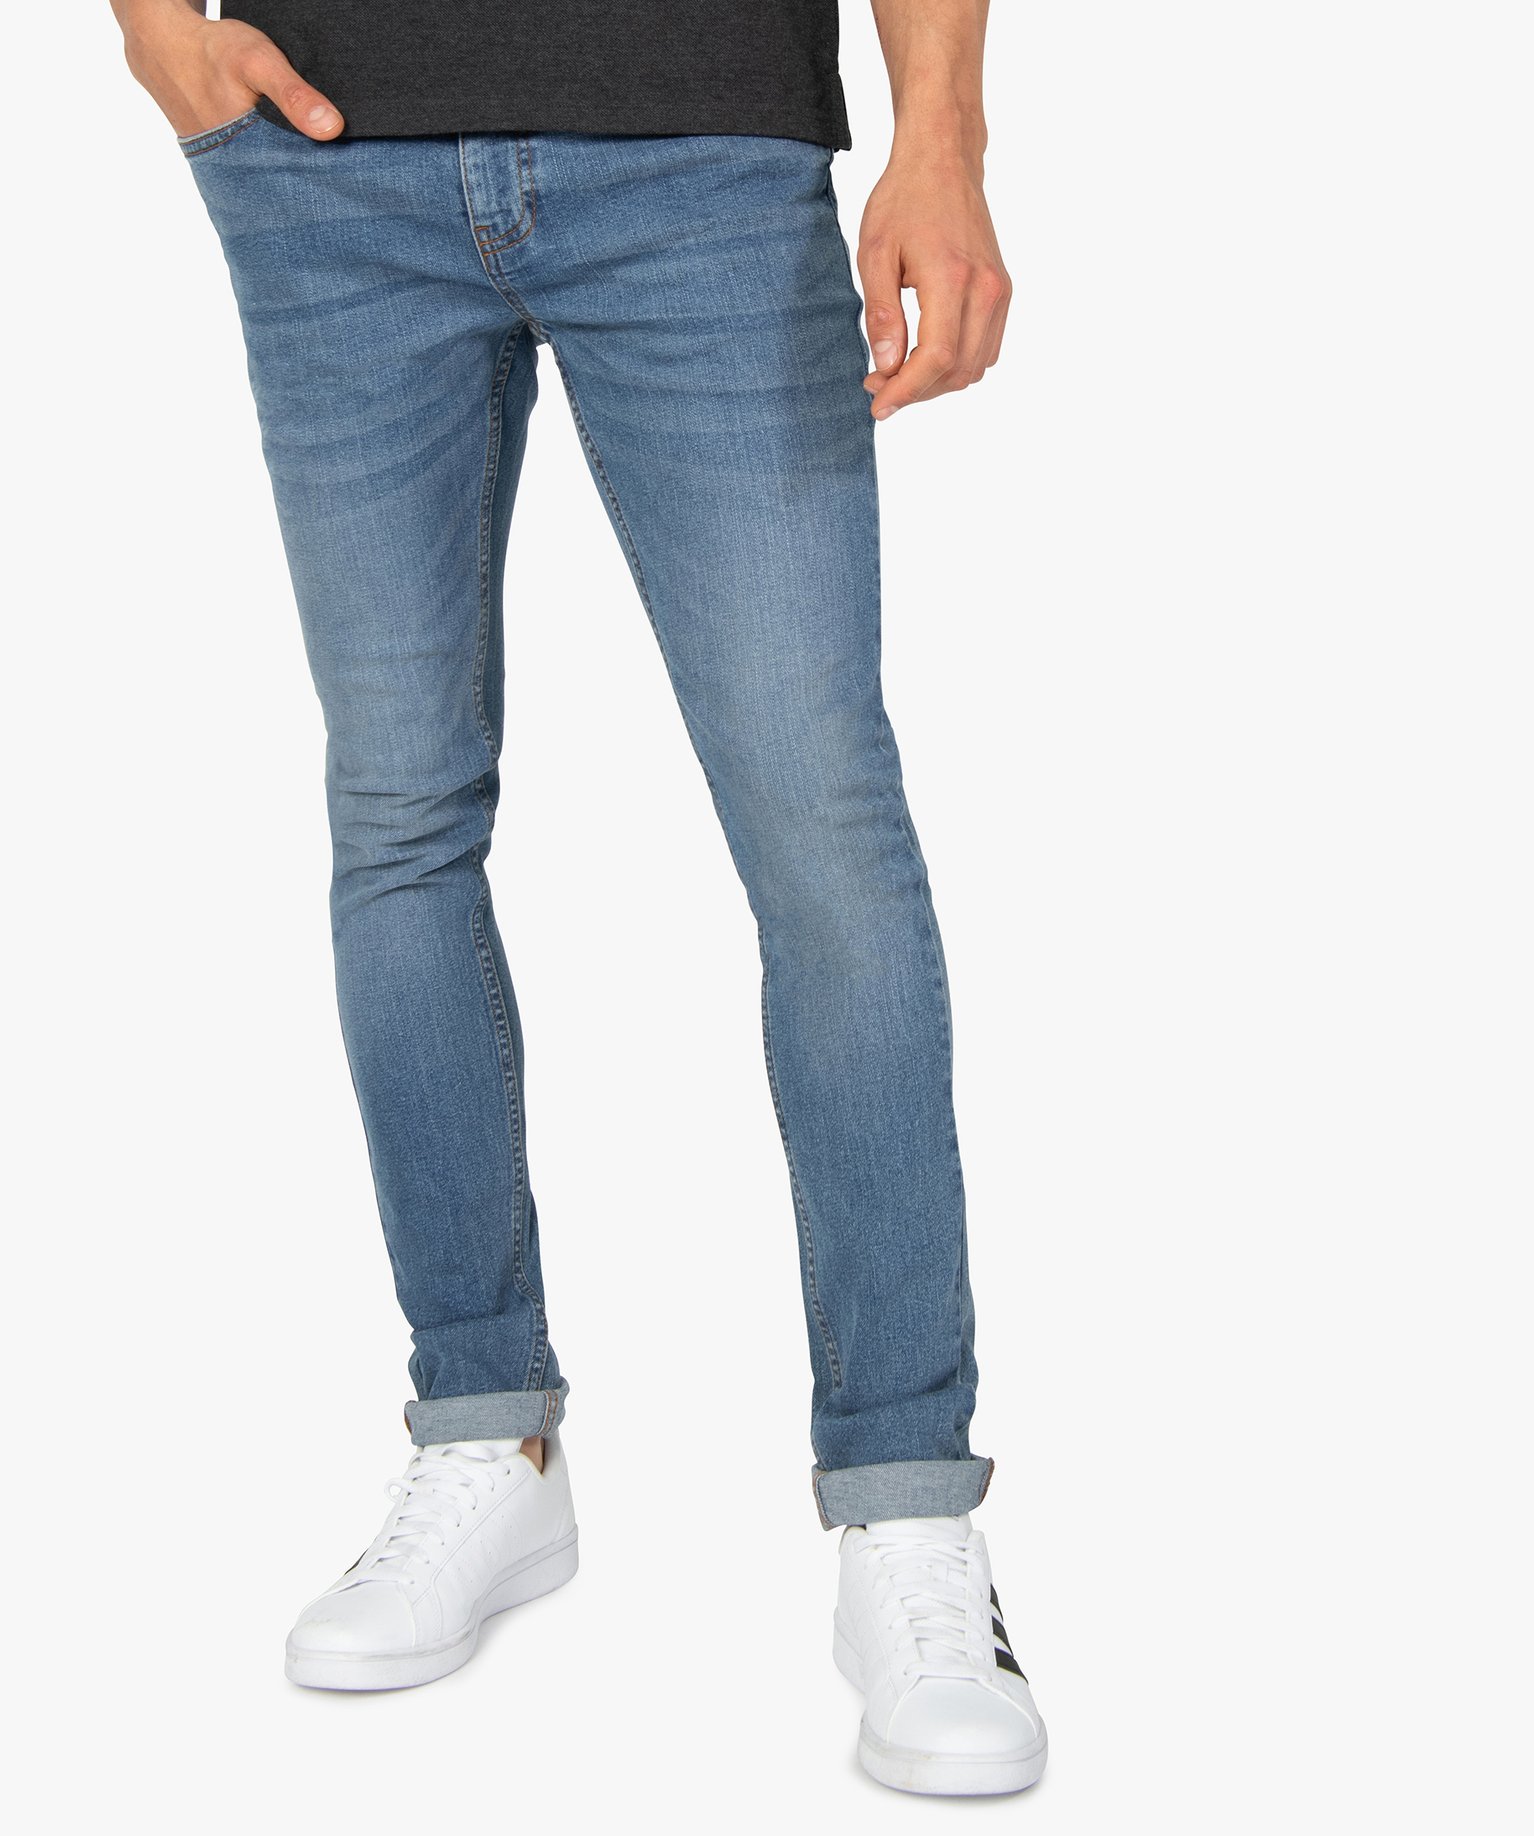 jean homme coupe skinny delave gris